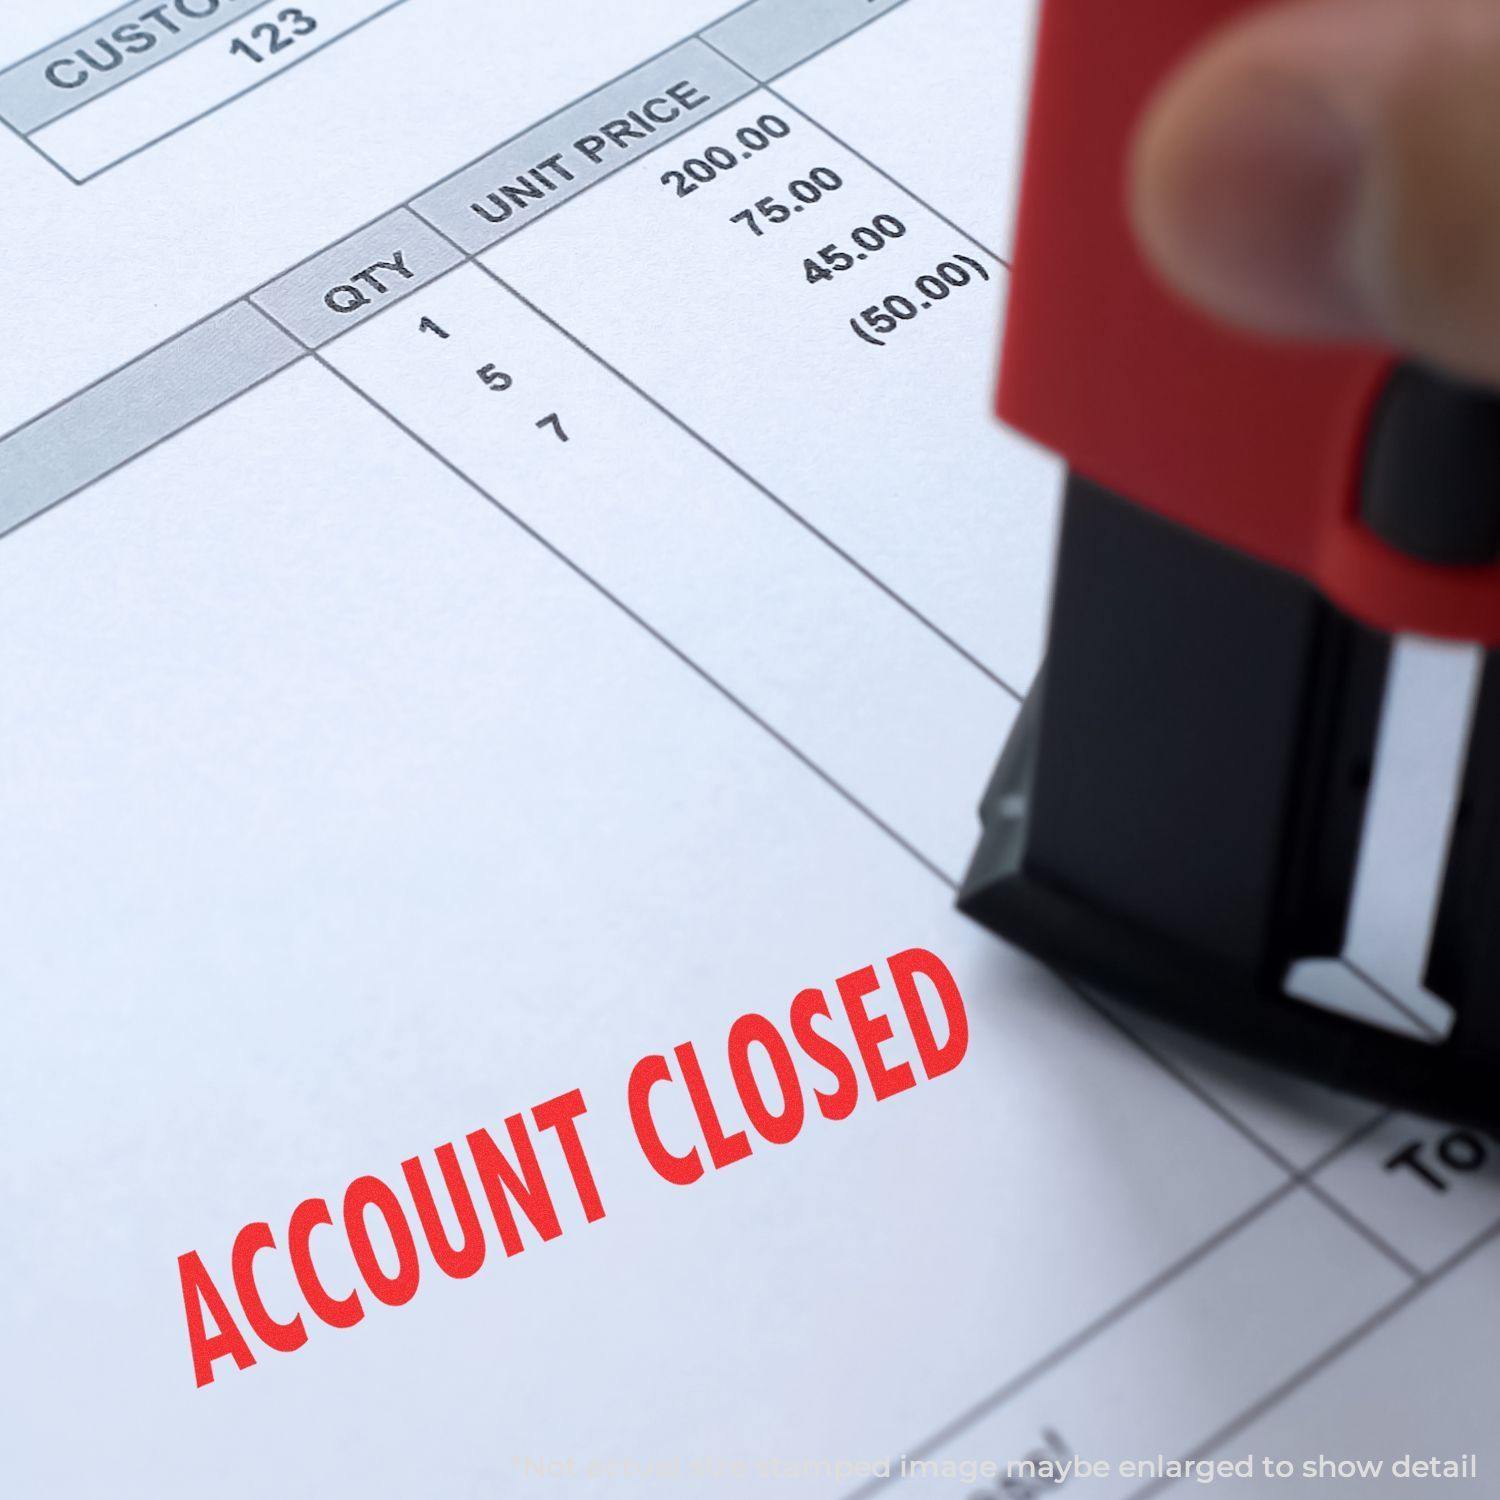 Large Self-Inking Account Closed Stamp image, showing "ACCOUNT CLOSED" message in large red font on an invoice.